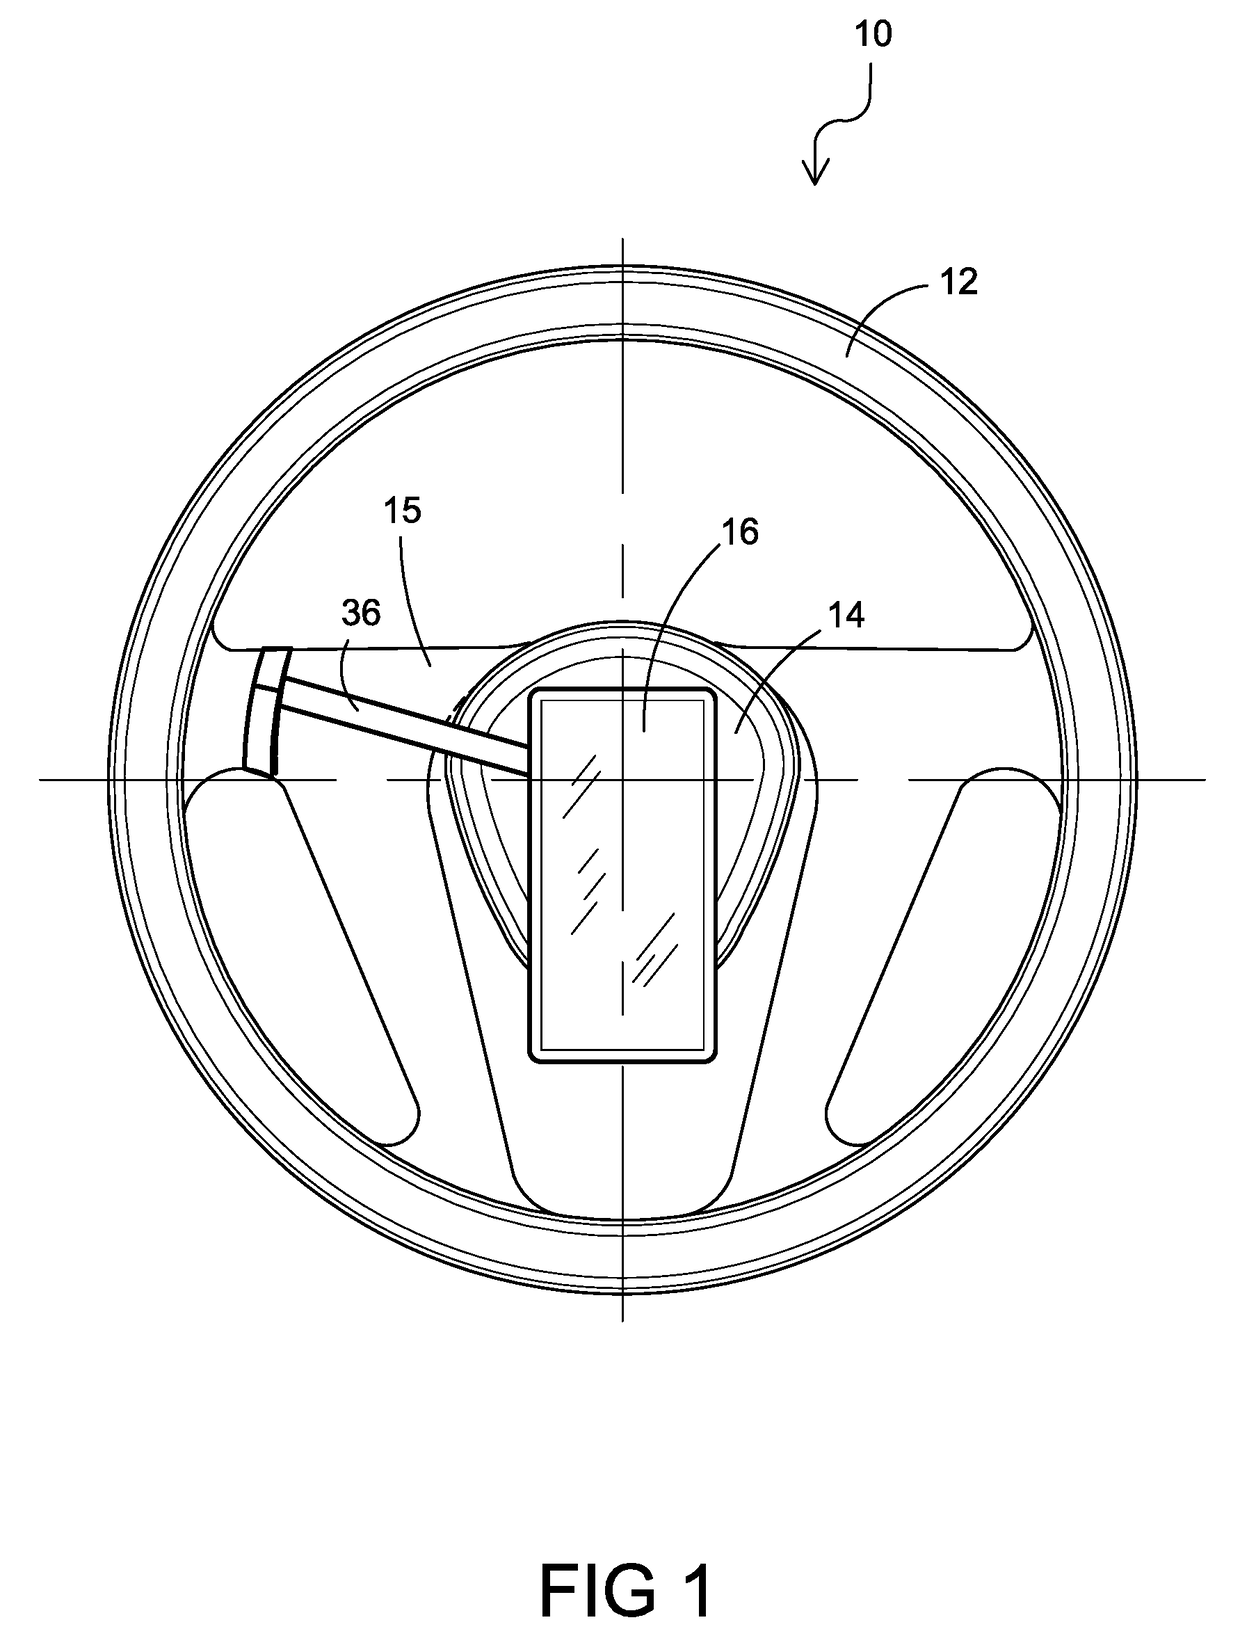 Self Leveling Steering Wheel Mount Assembly for Electronic Cell Phone Device Having Side Camera